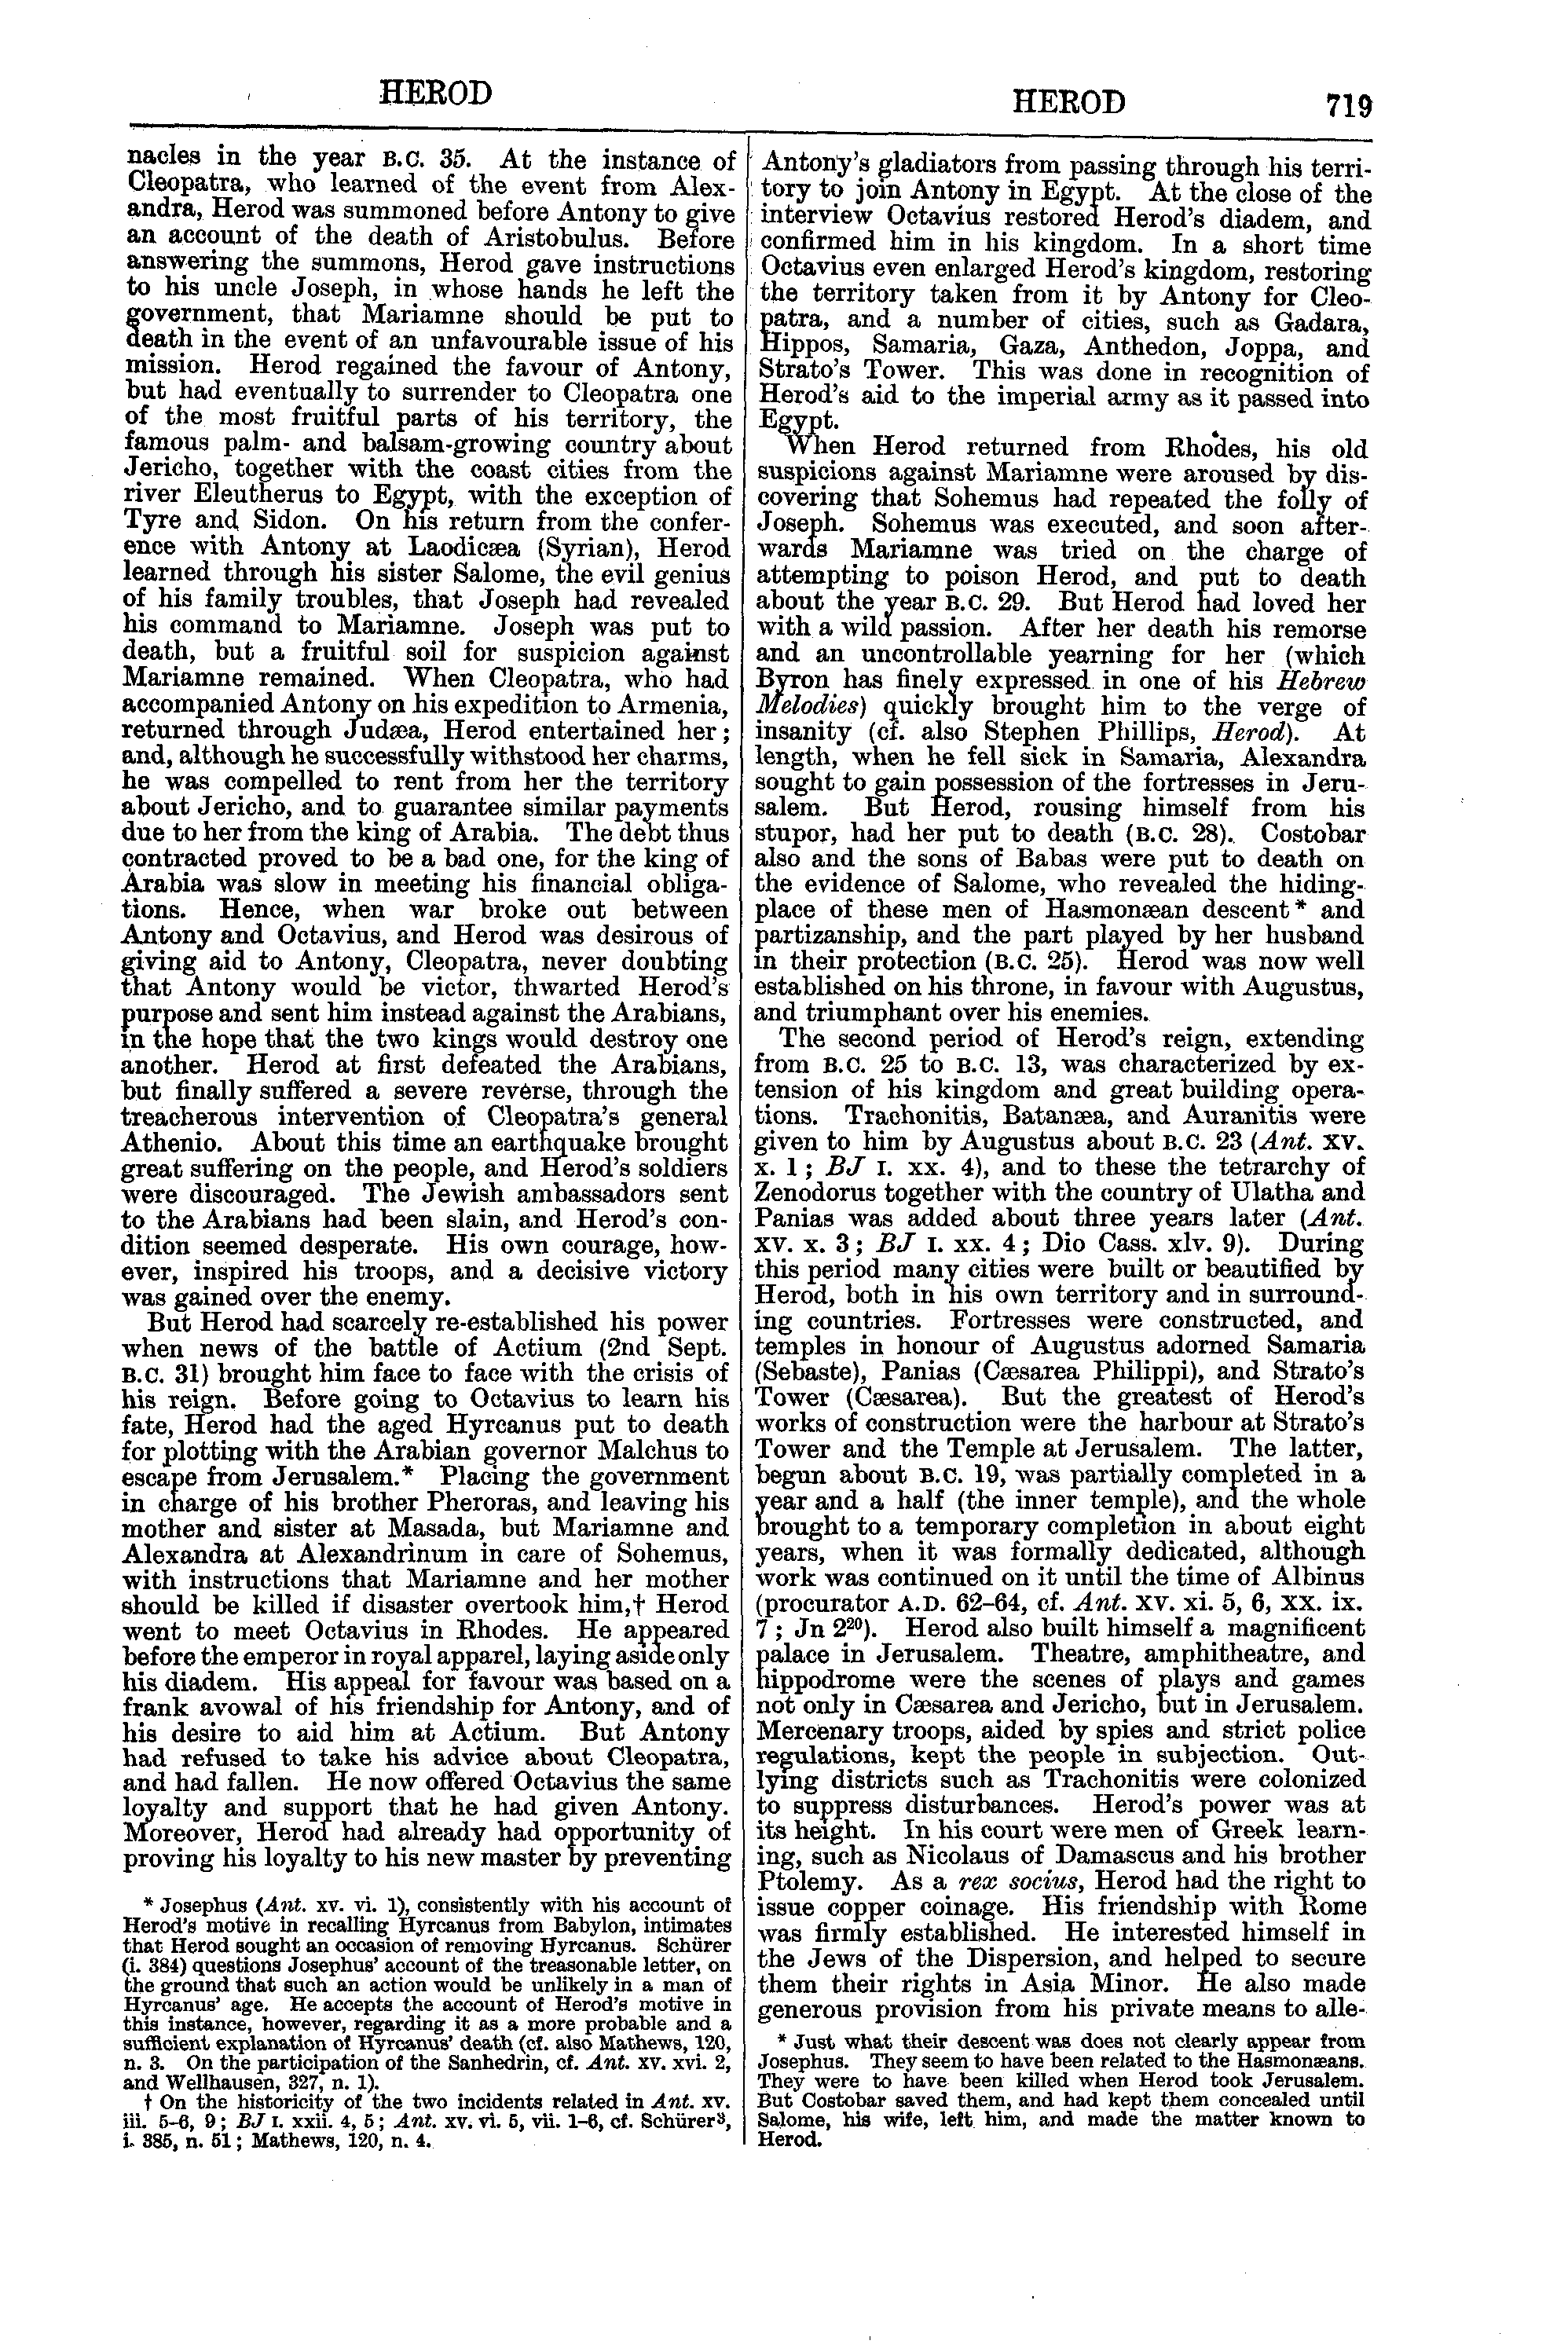 Image of page 719